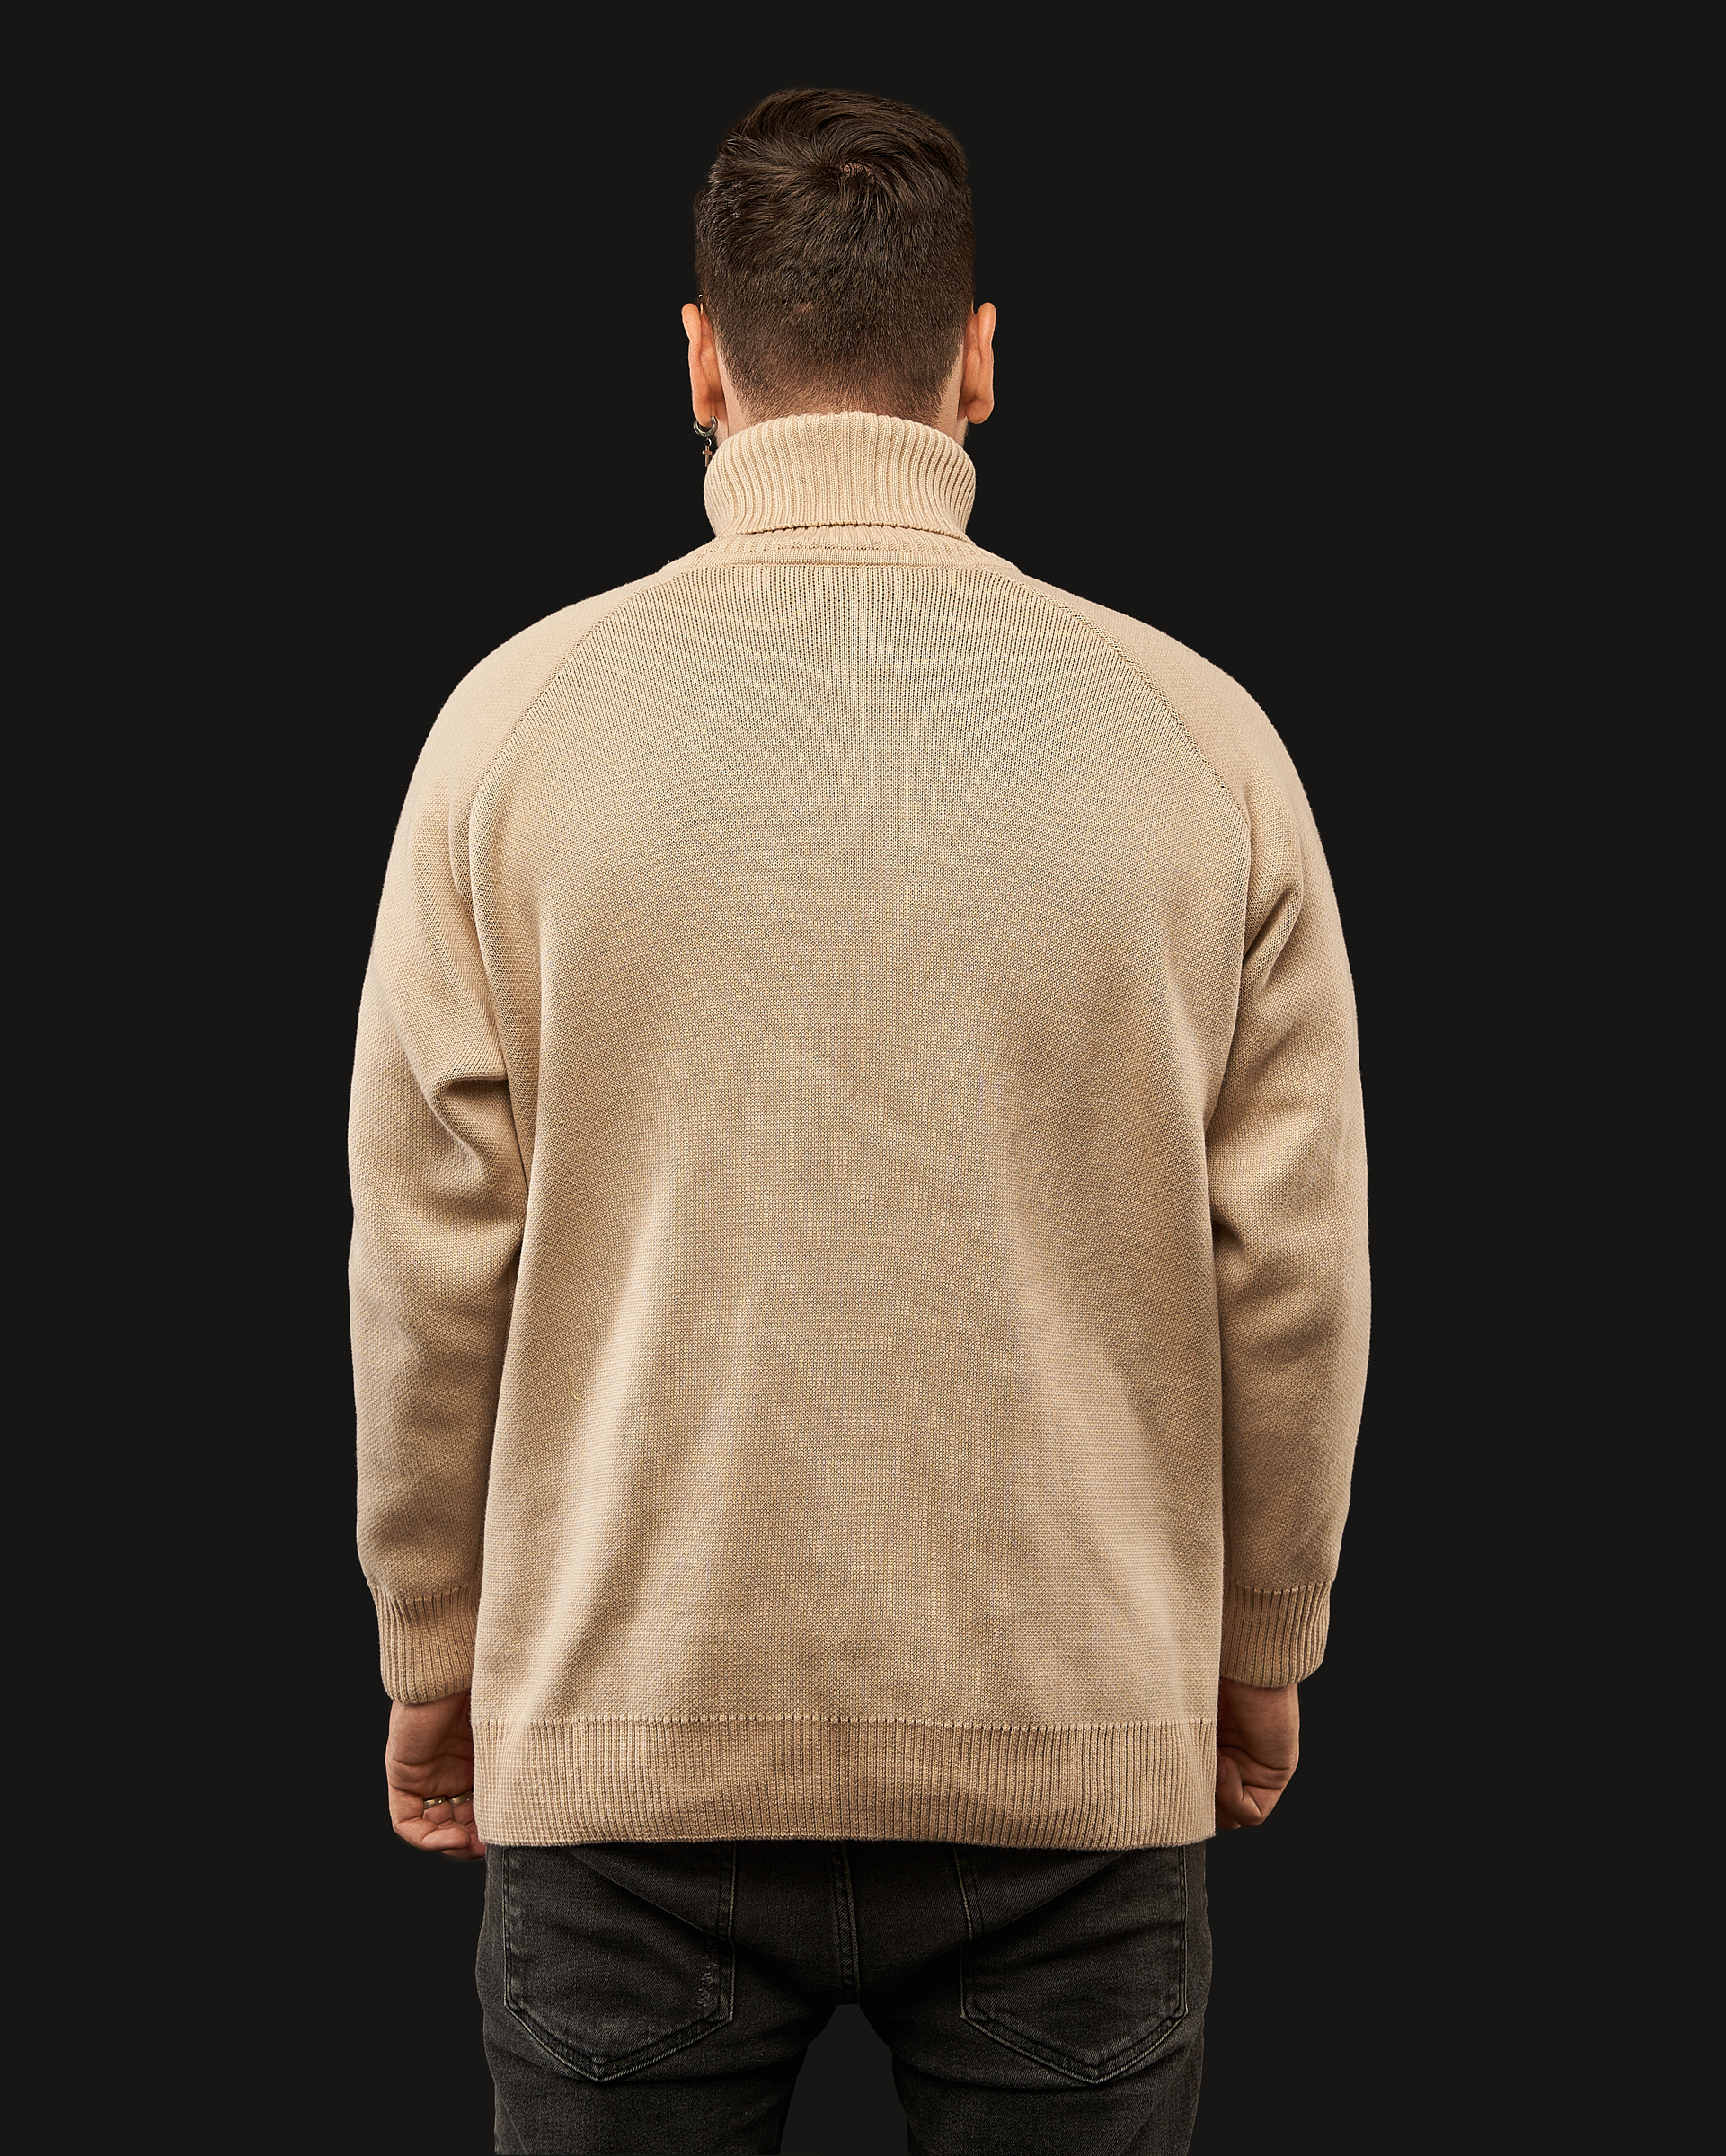 Sweater (beige) Image: https://ohueno-official.com/wp-content/uploads/m01950-1.jpg